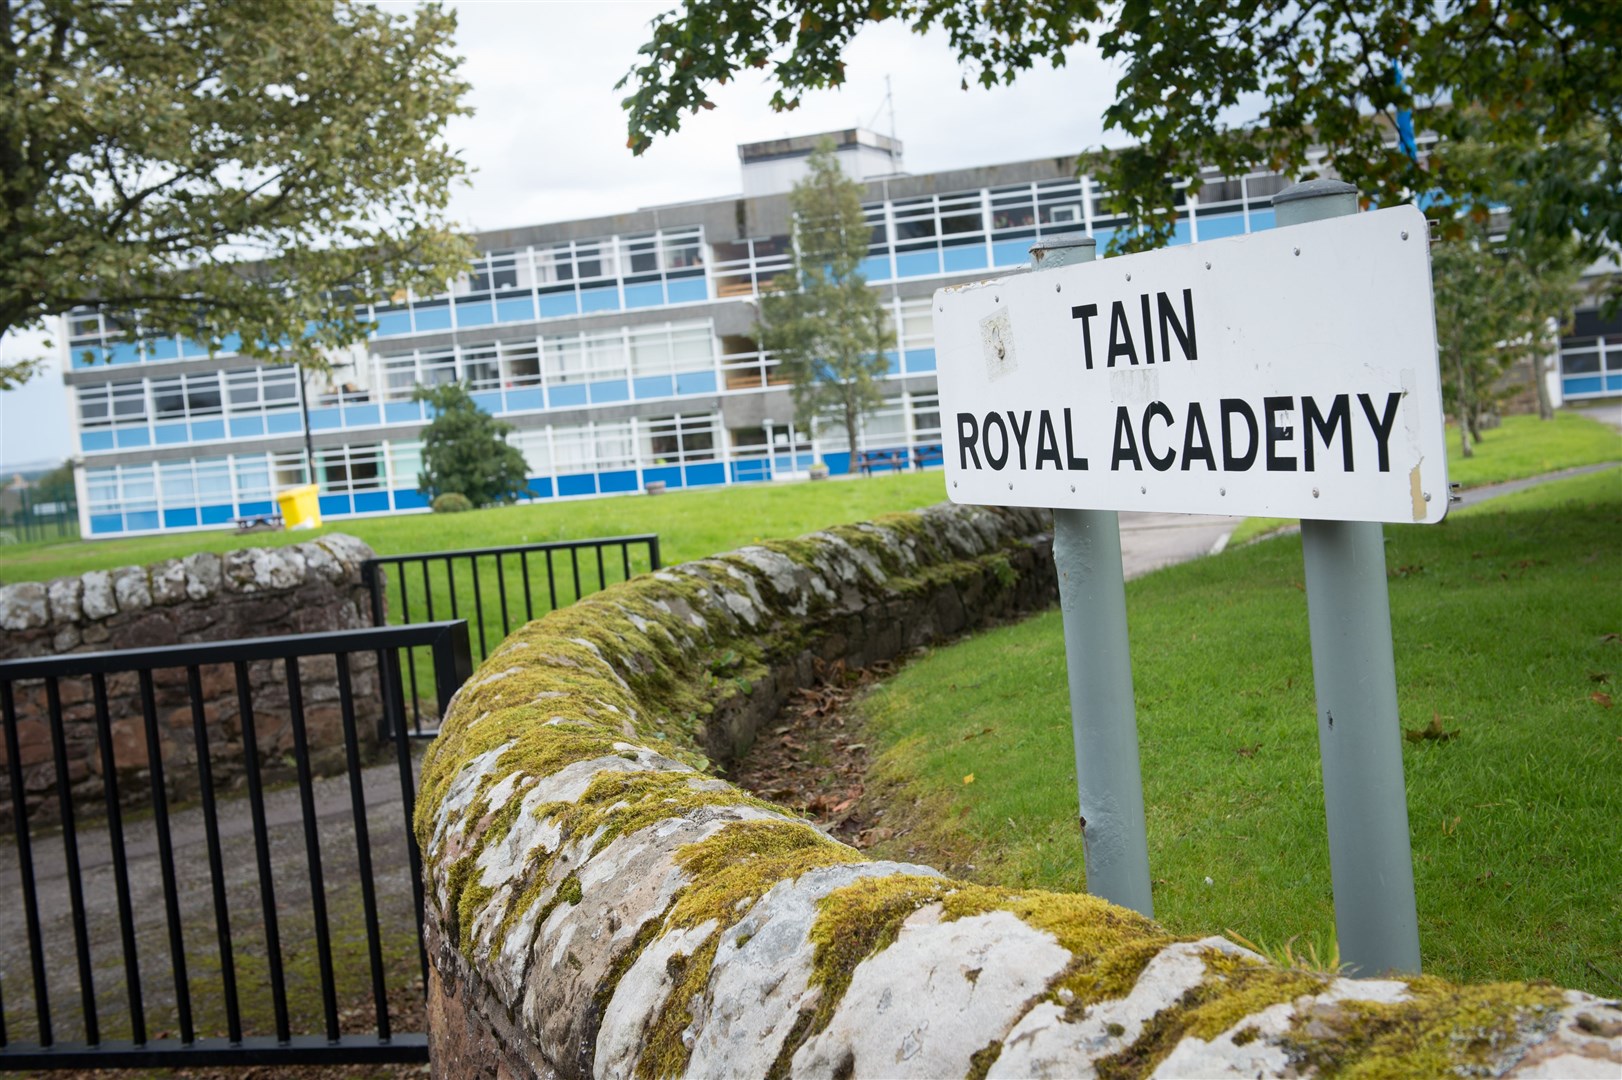 Tain Royal Academy is one of the schools that would be replaced by the new site. Picture: Callum Mackay. Image No. 026670.